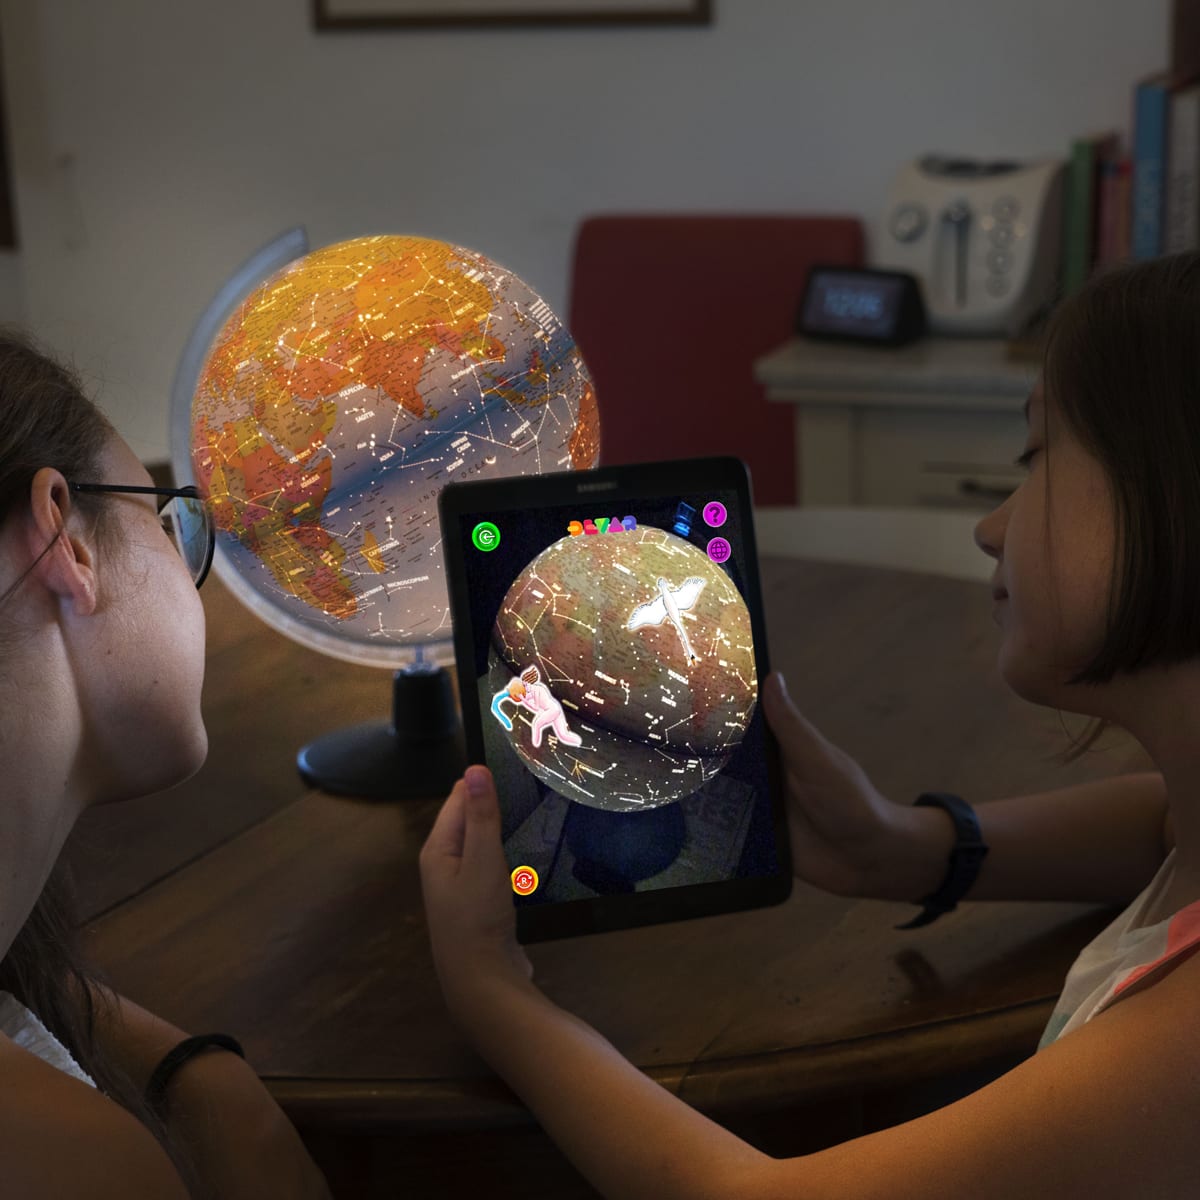 Astronomer 2 in 1 Globe w/Augmented Reality - WP19102 - Ultimate Globes